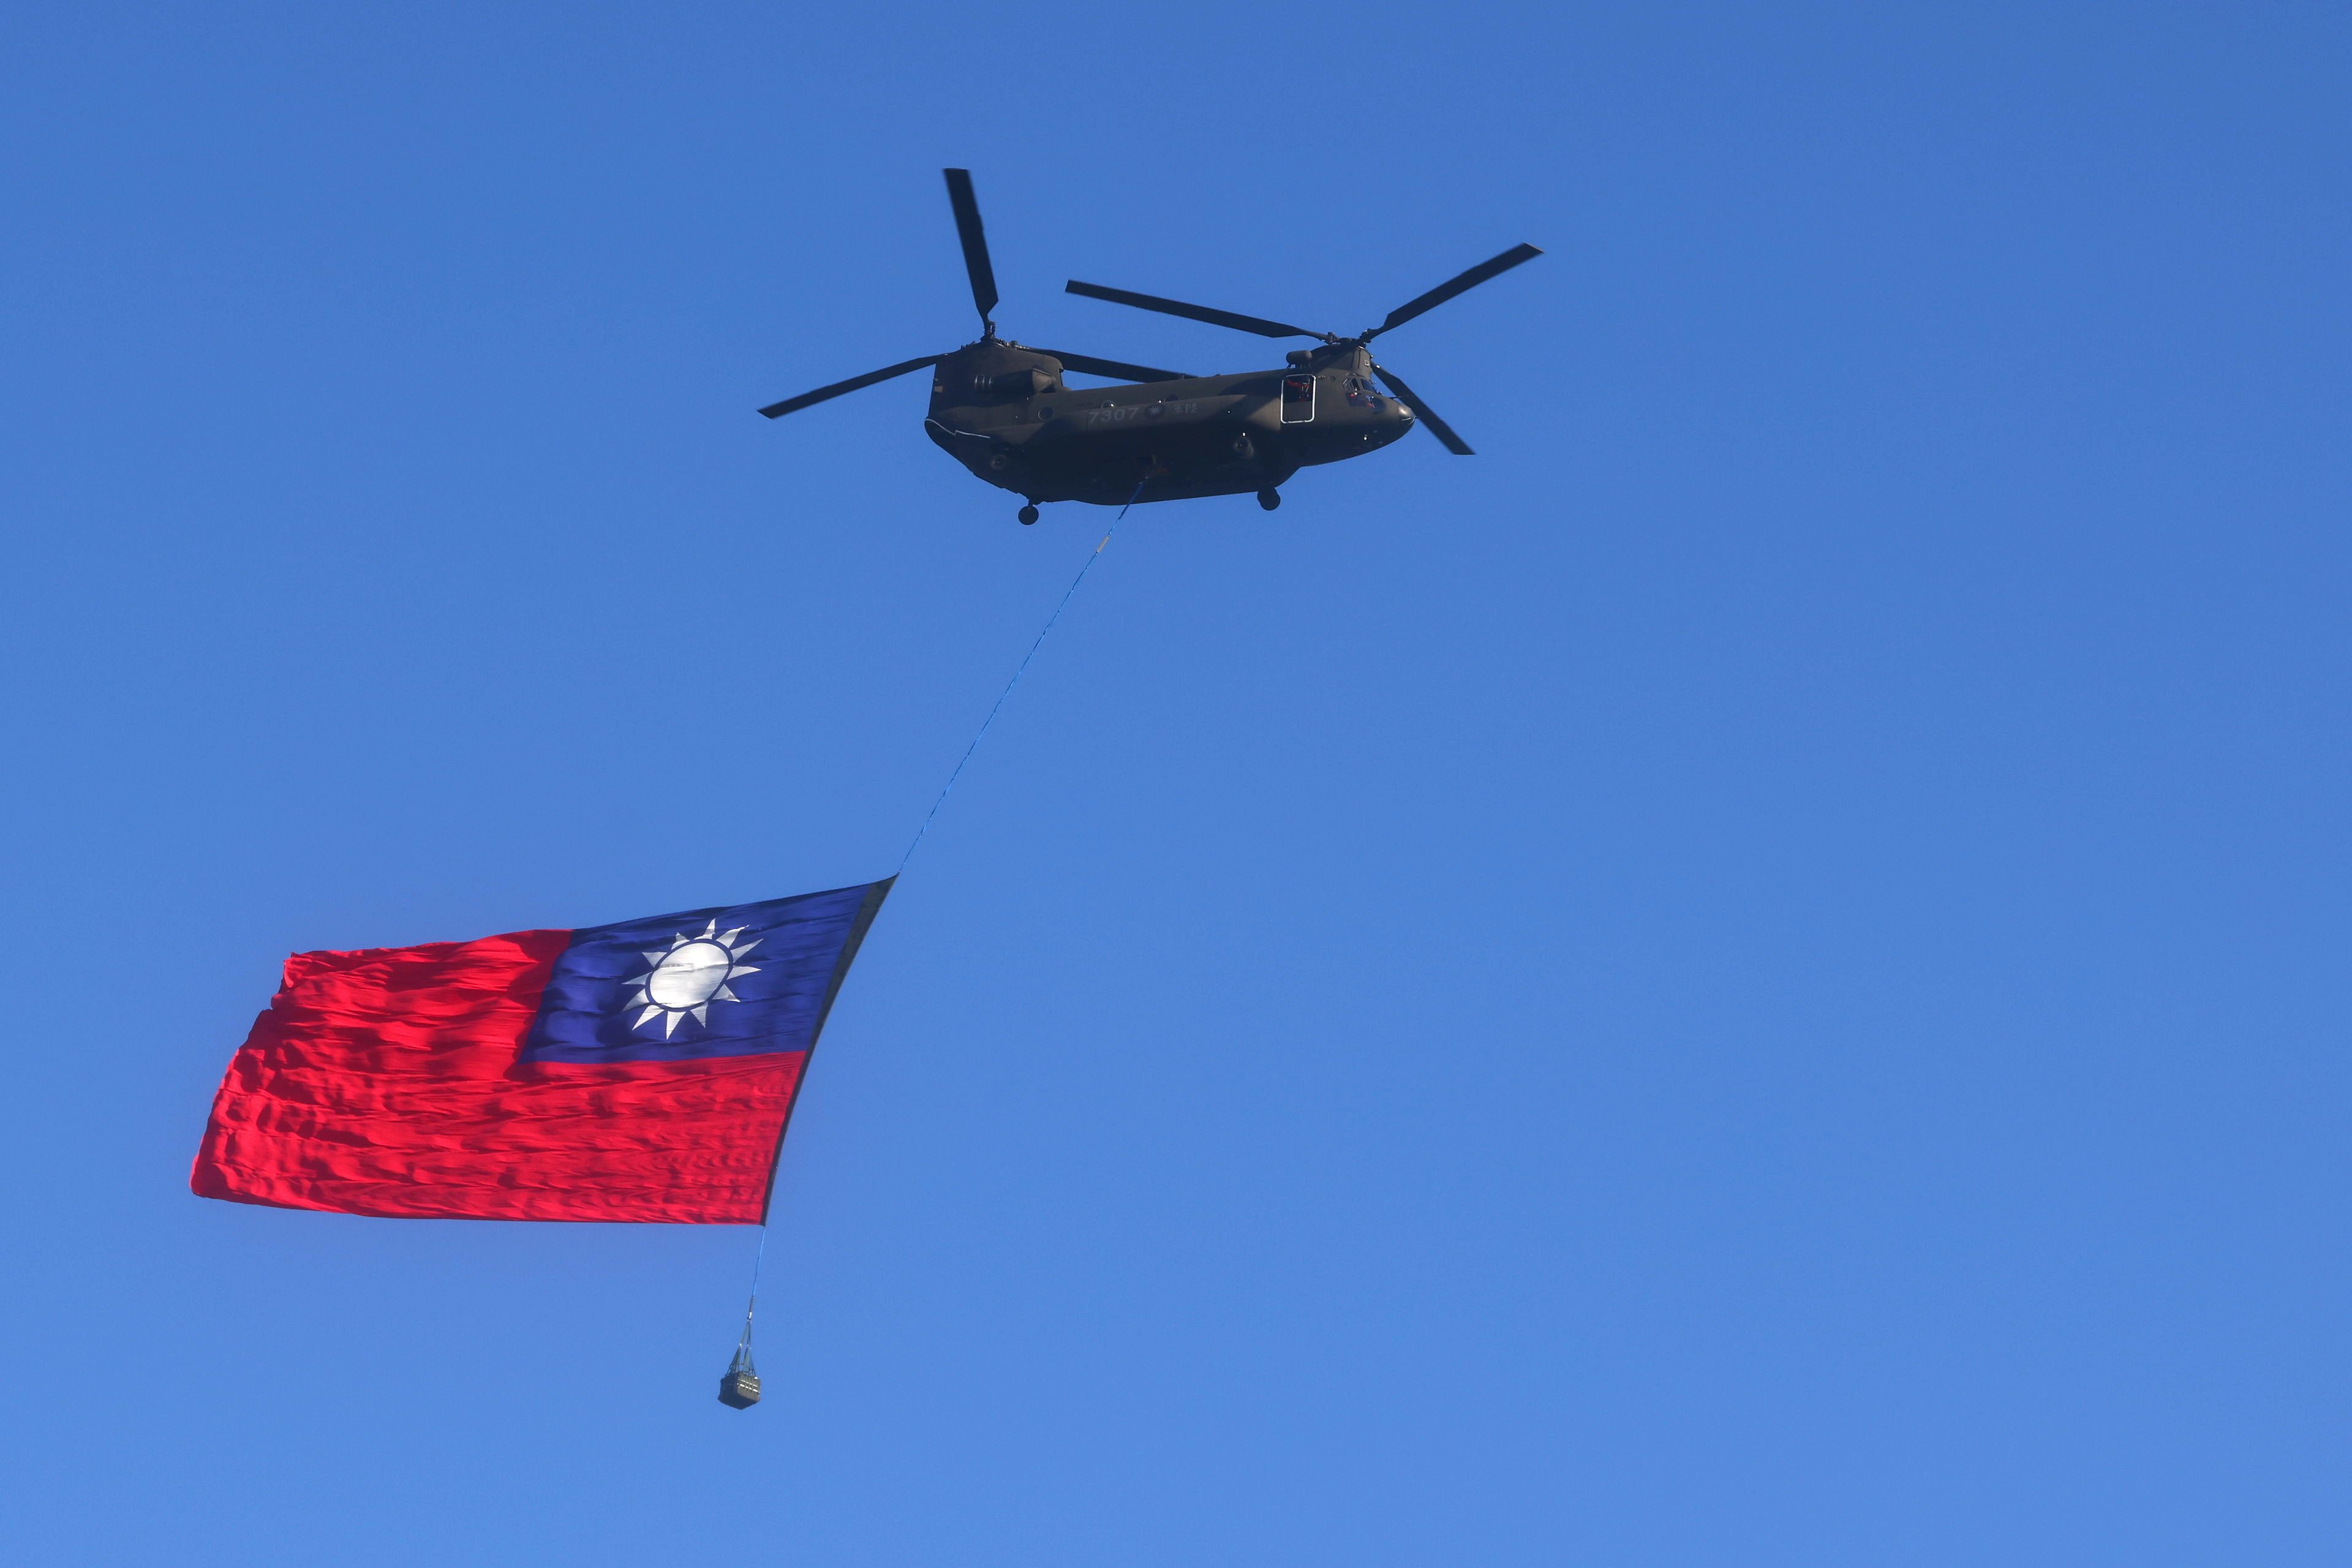 Taiwan defense minister says tensions with China are the worst in 4 decades